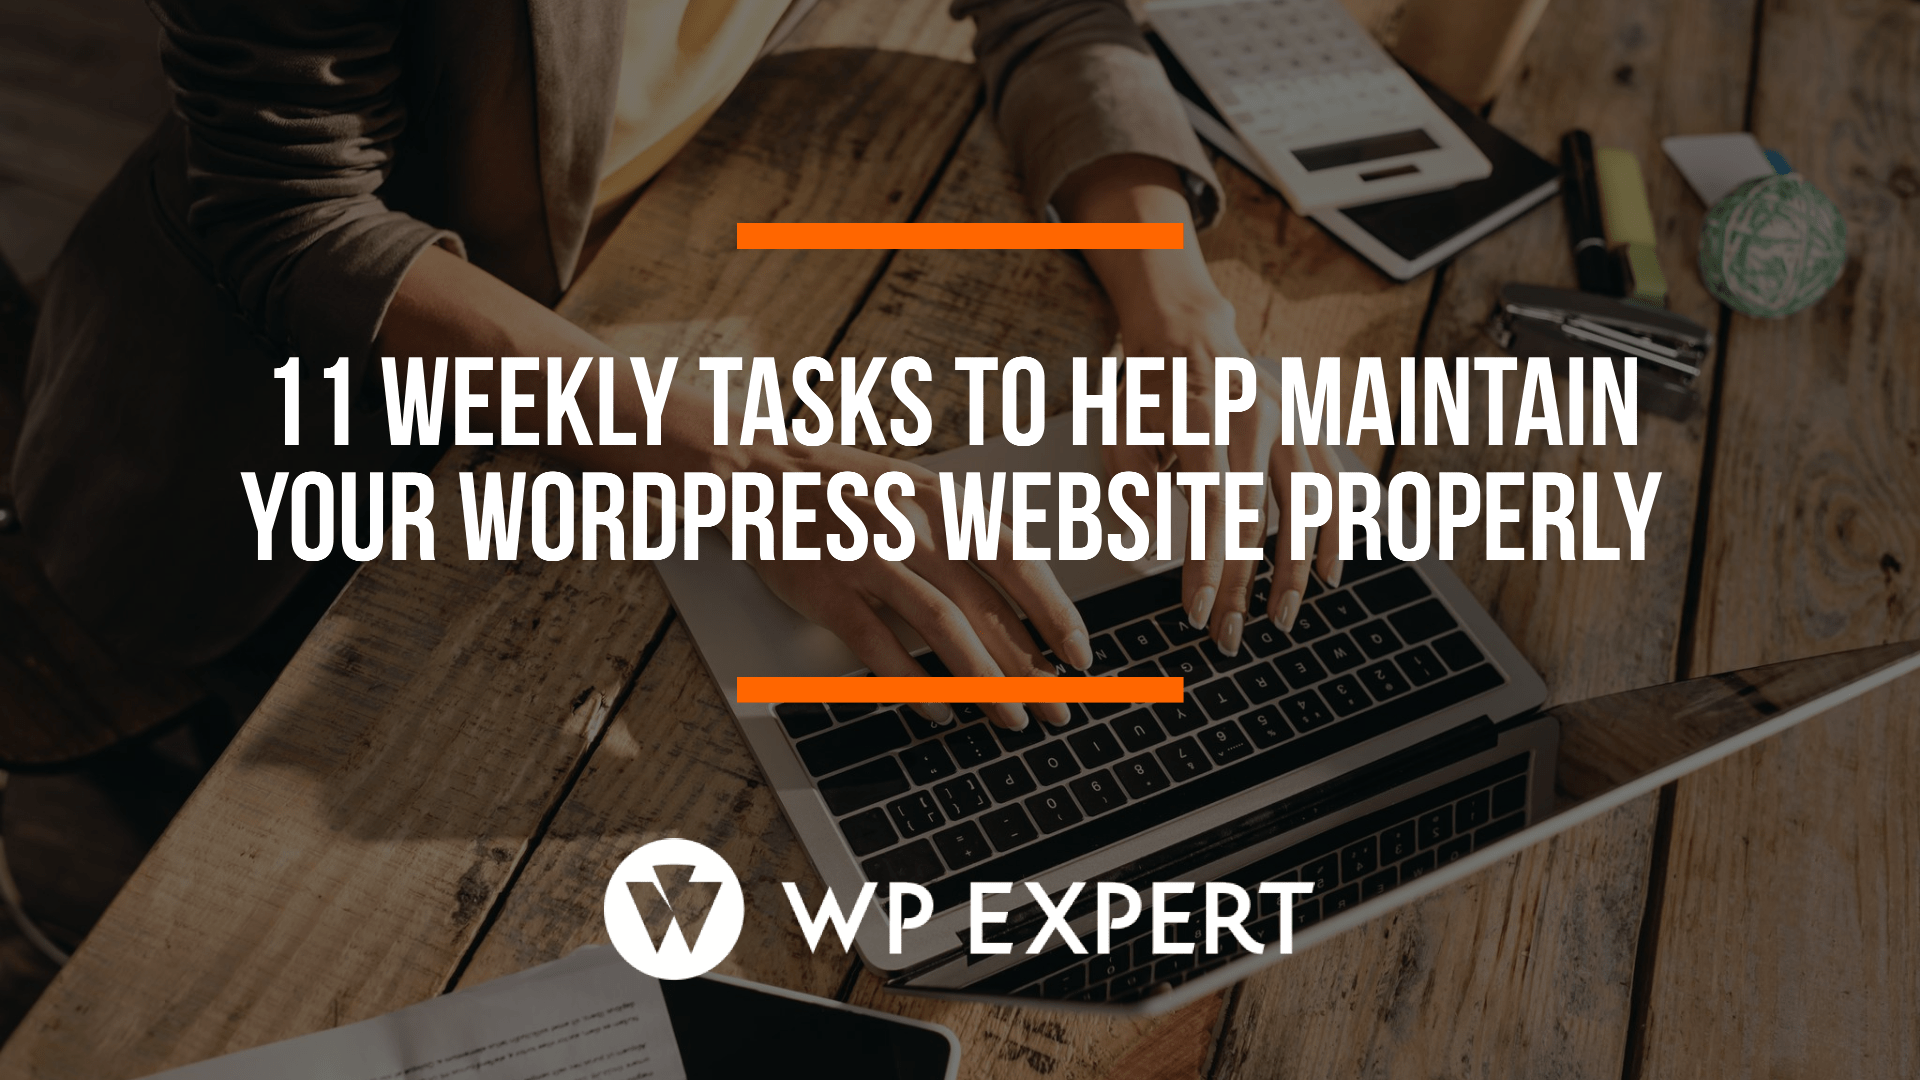 11 Weekly Tasks To Help Maintain Your WordPress Website Properly